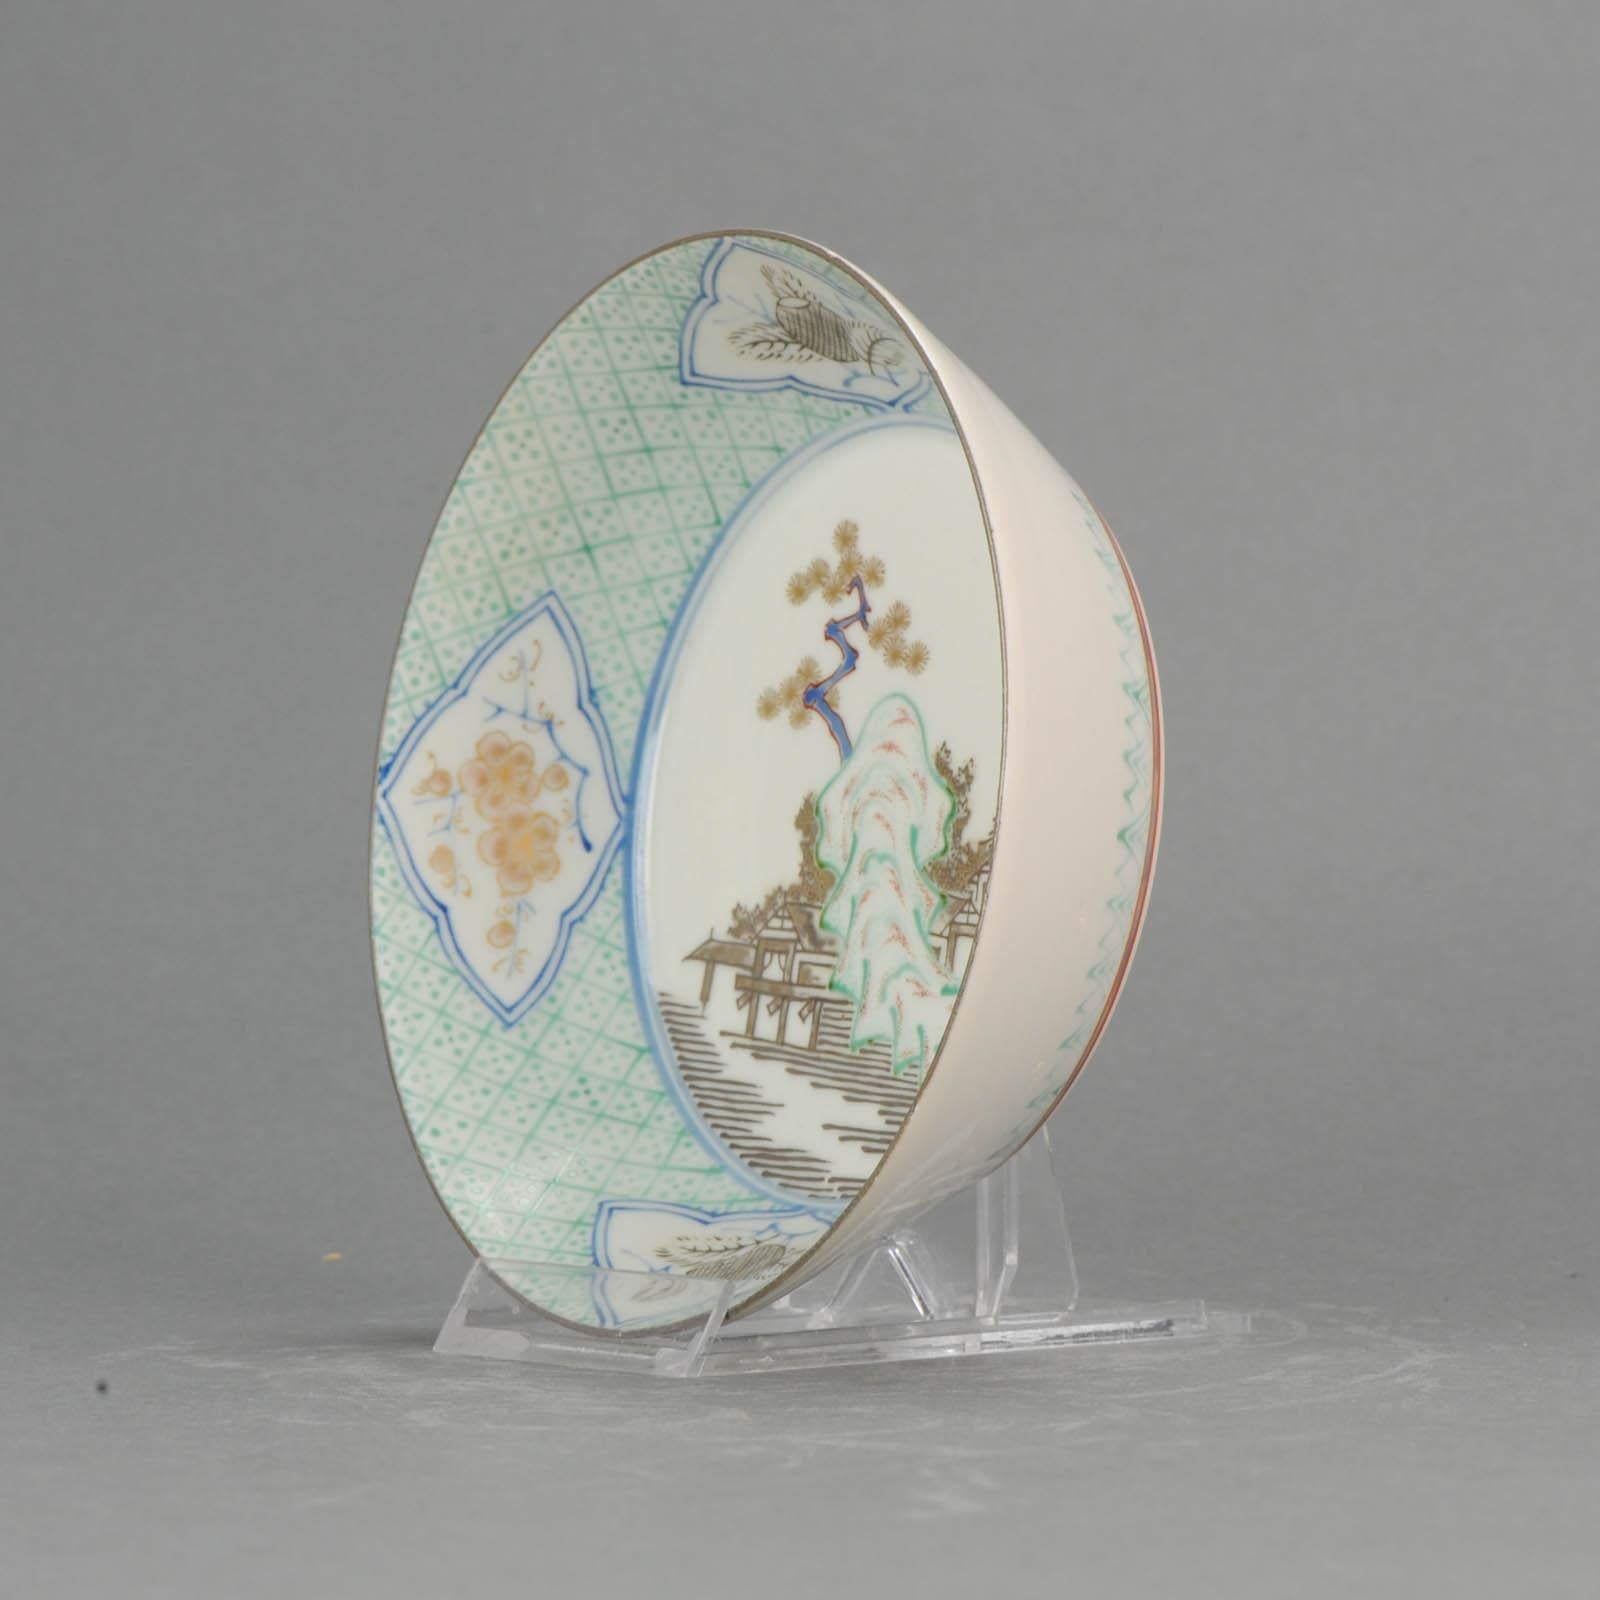 Description

A very nice bowl 17th century Ko-Kutani style 1660-1680. Edo period. Absolutely the most beautiful piece of porcelain i have ever seen.

7-1-19-1-3

 

Reference see: Shibata Collection Volume 2

Condition

Overall condition